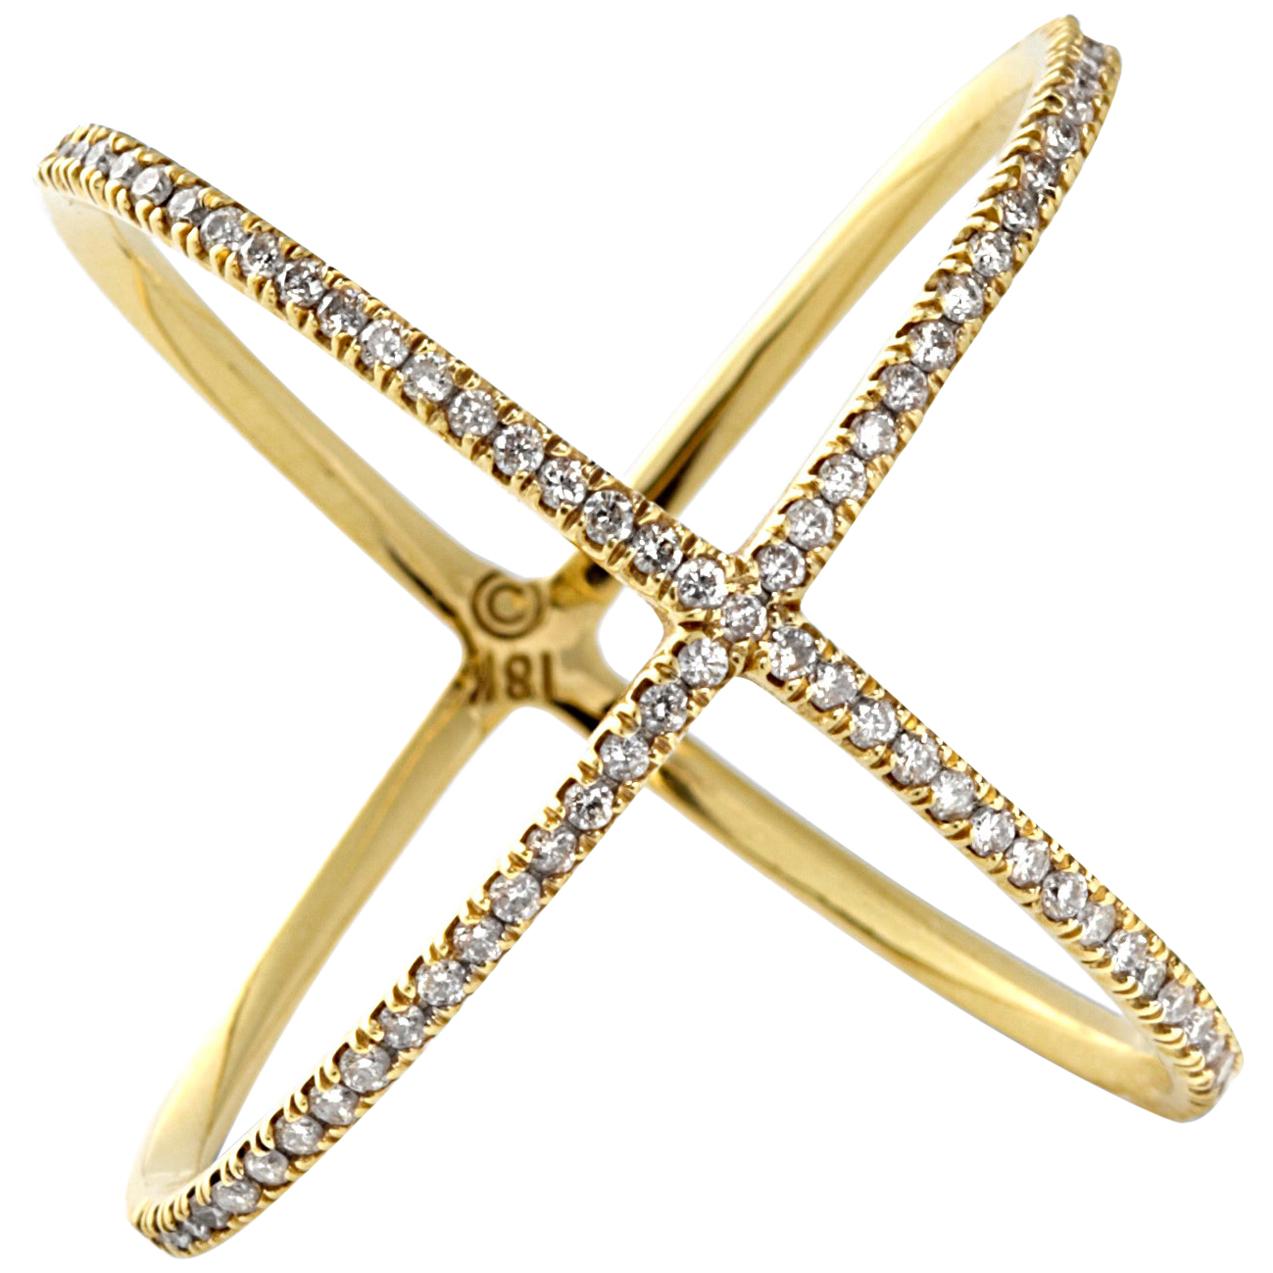 Eva Fehren X Ring in 18 Karat Yellow Gold with Pale Champagne Diamond Pavé For Sale